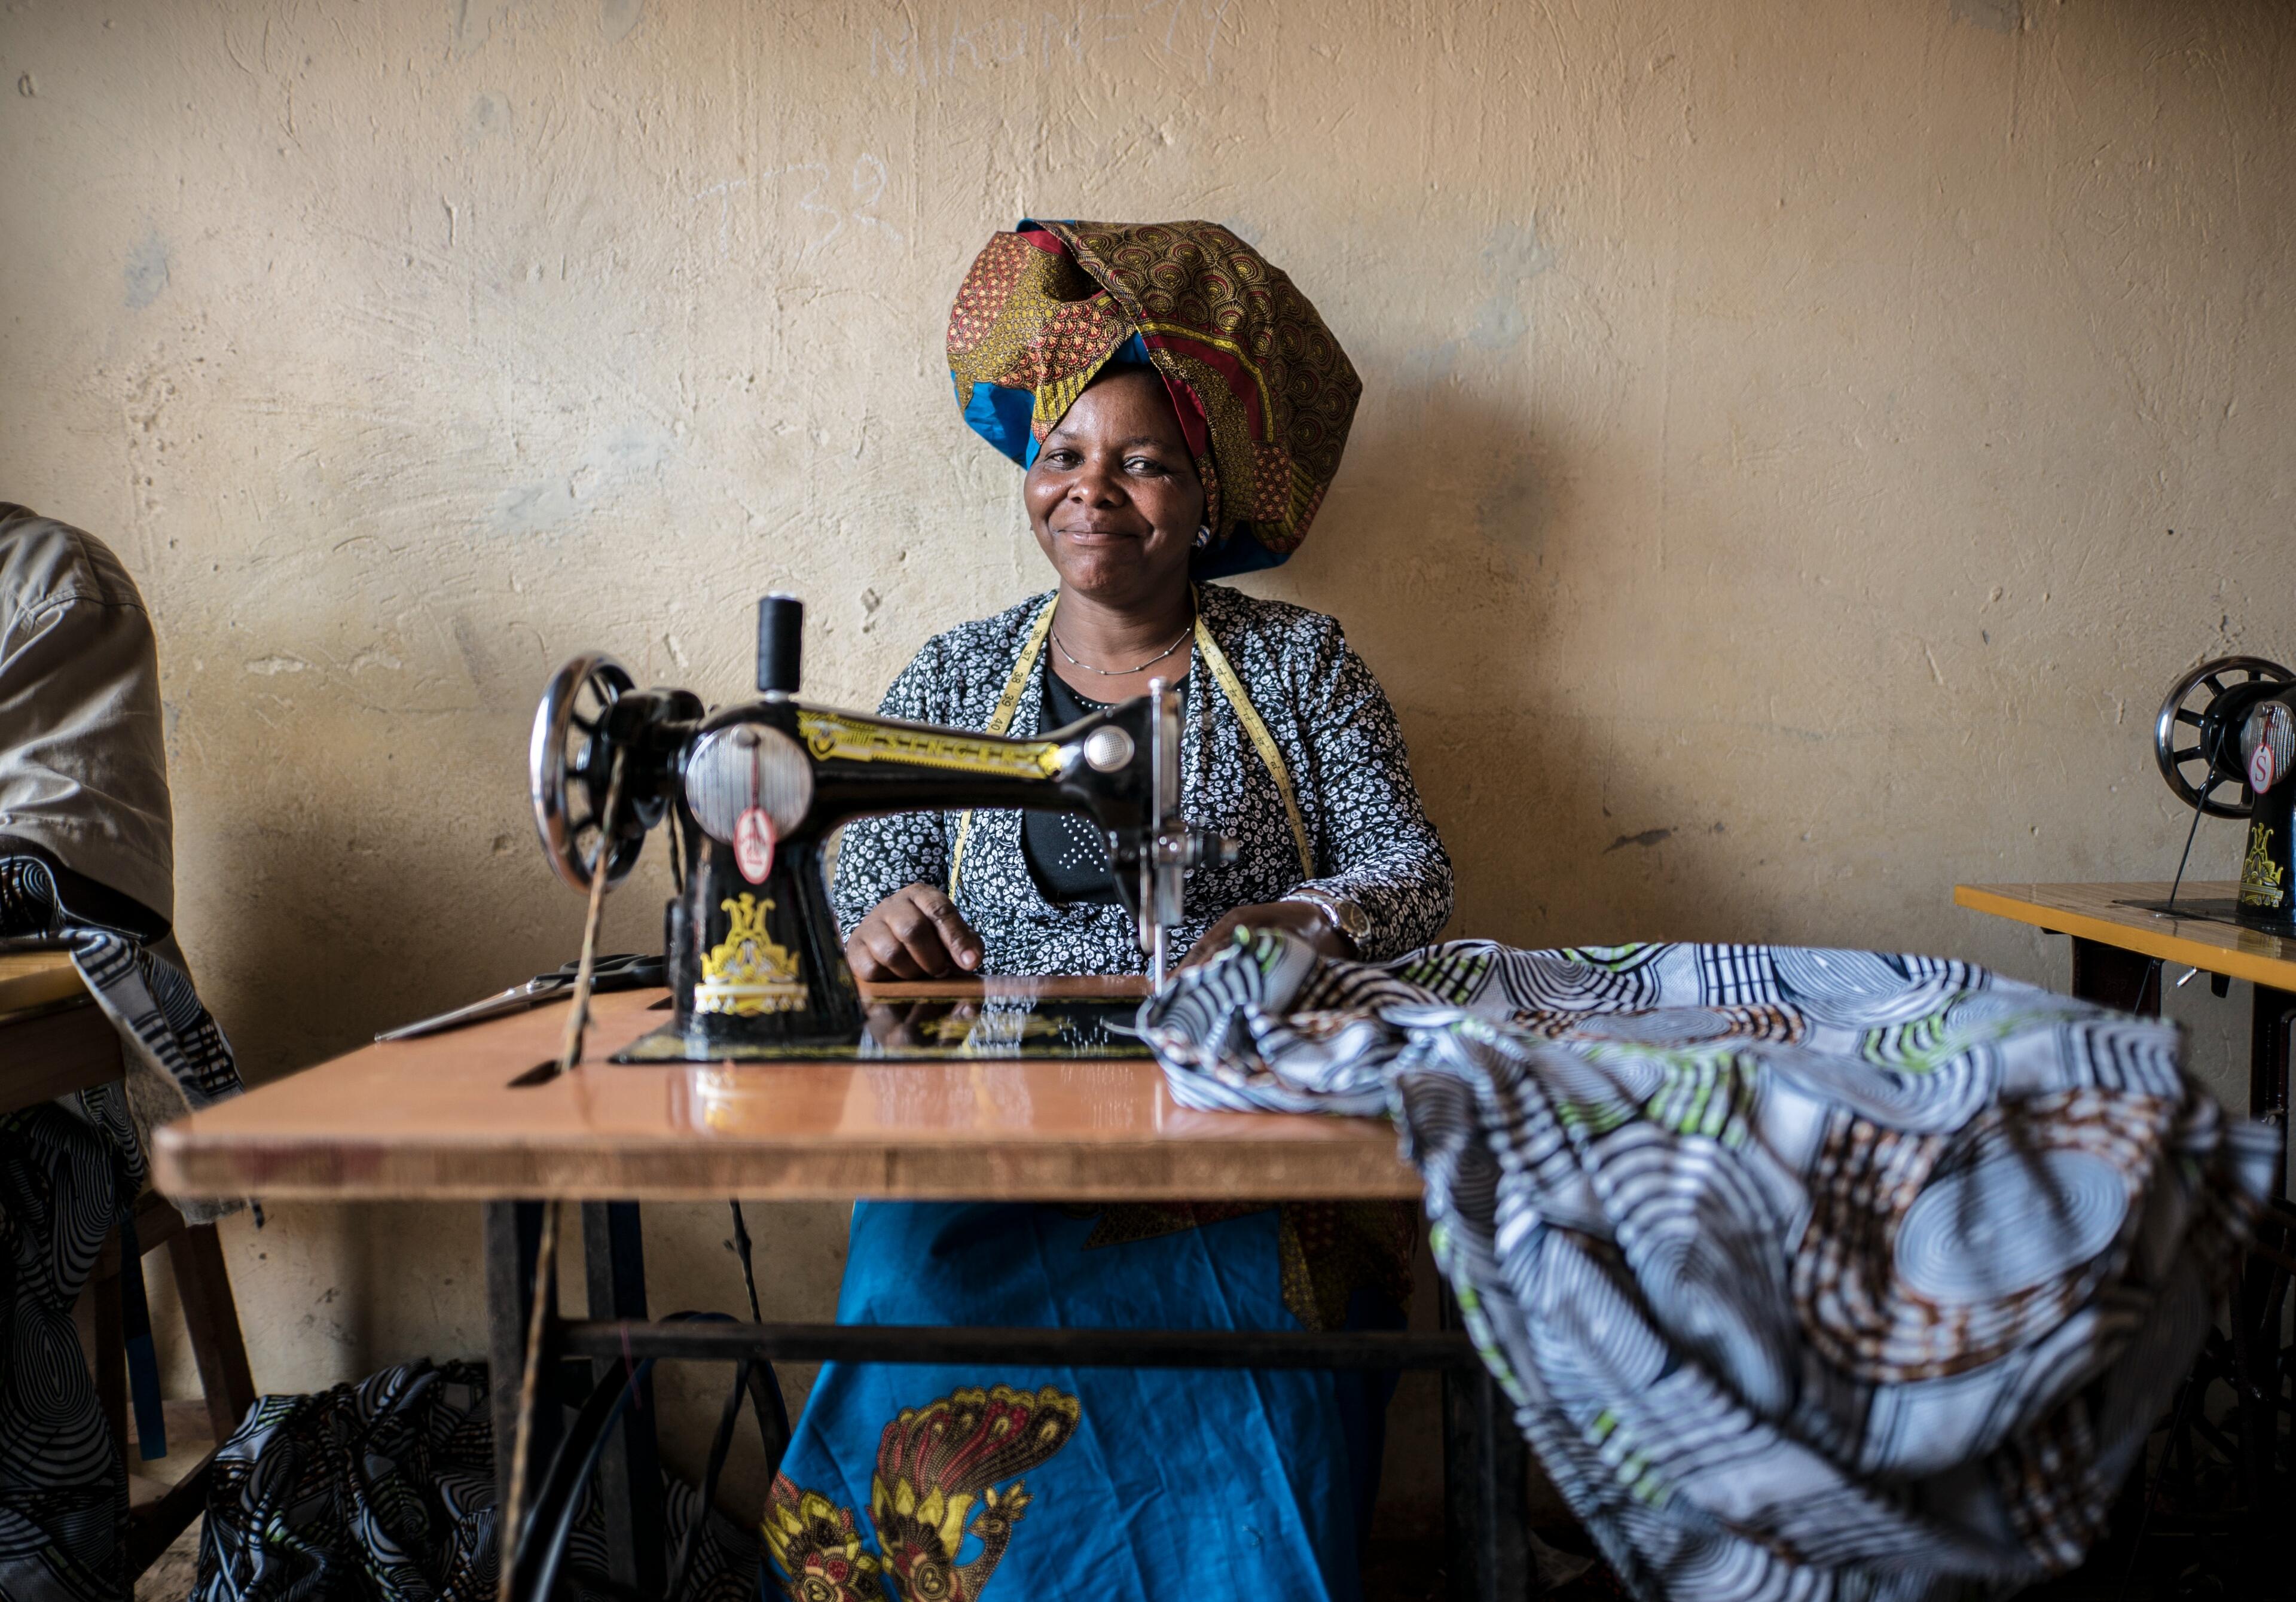 Domitila Kaliya, a Congolese refugee, sits smiling at her sewing machine with fabric in front of her